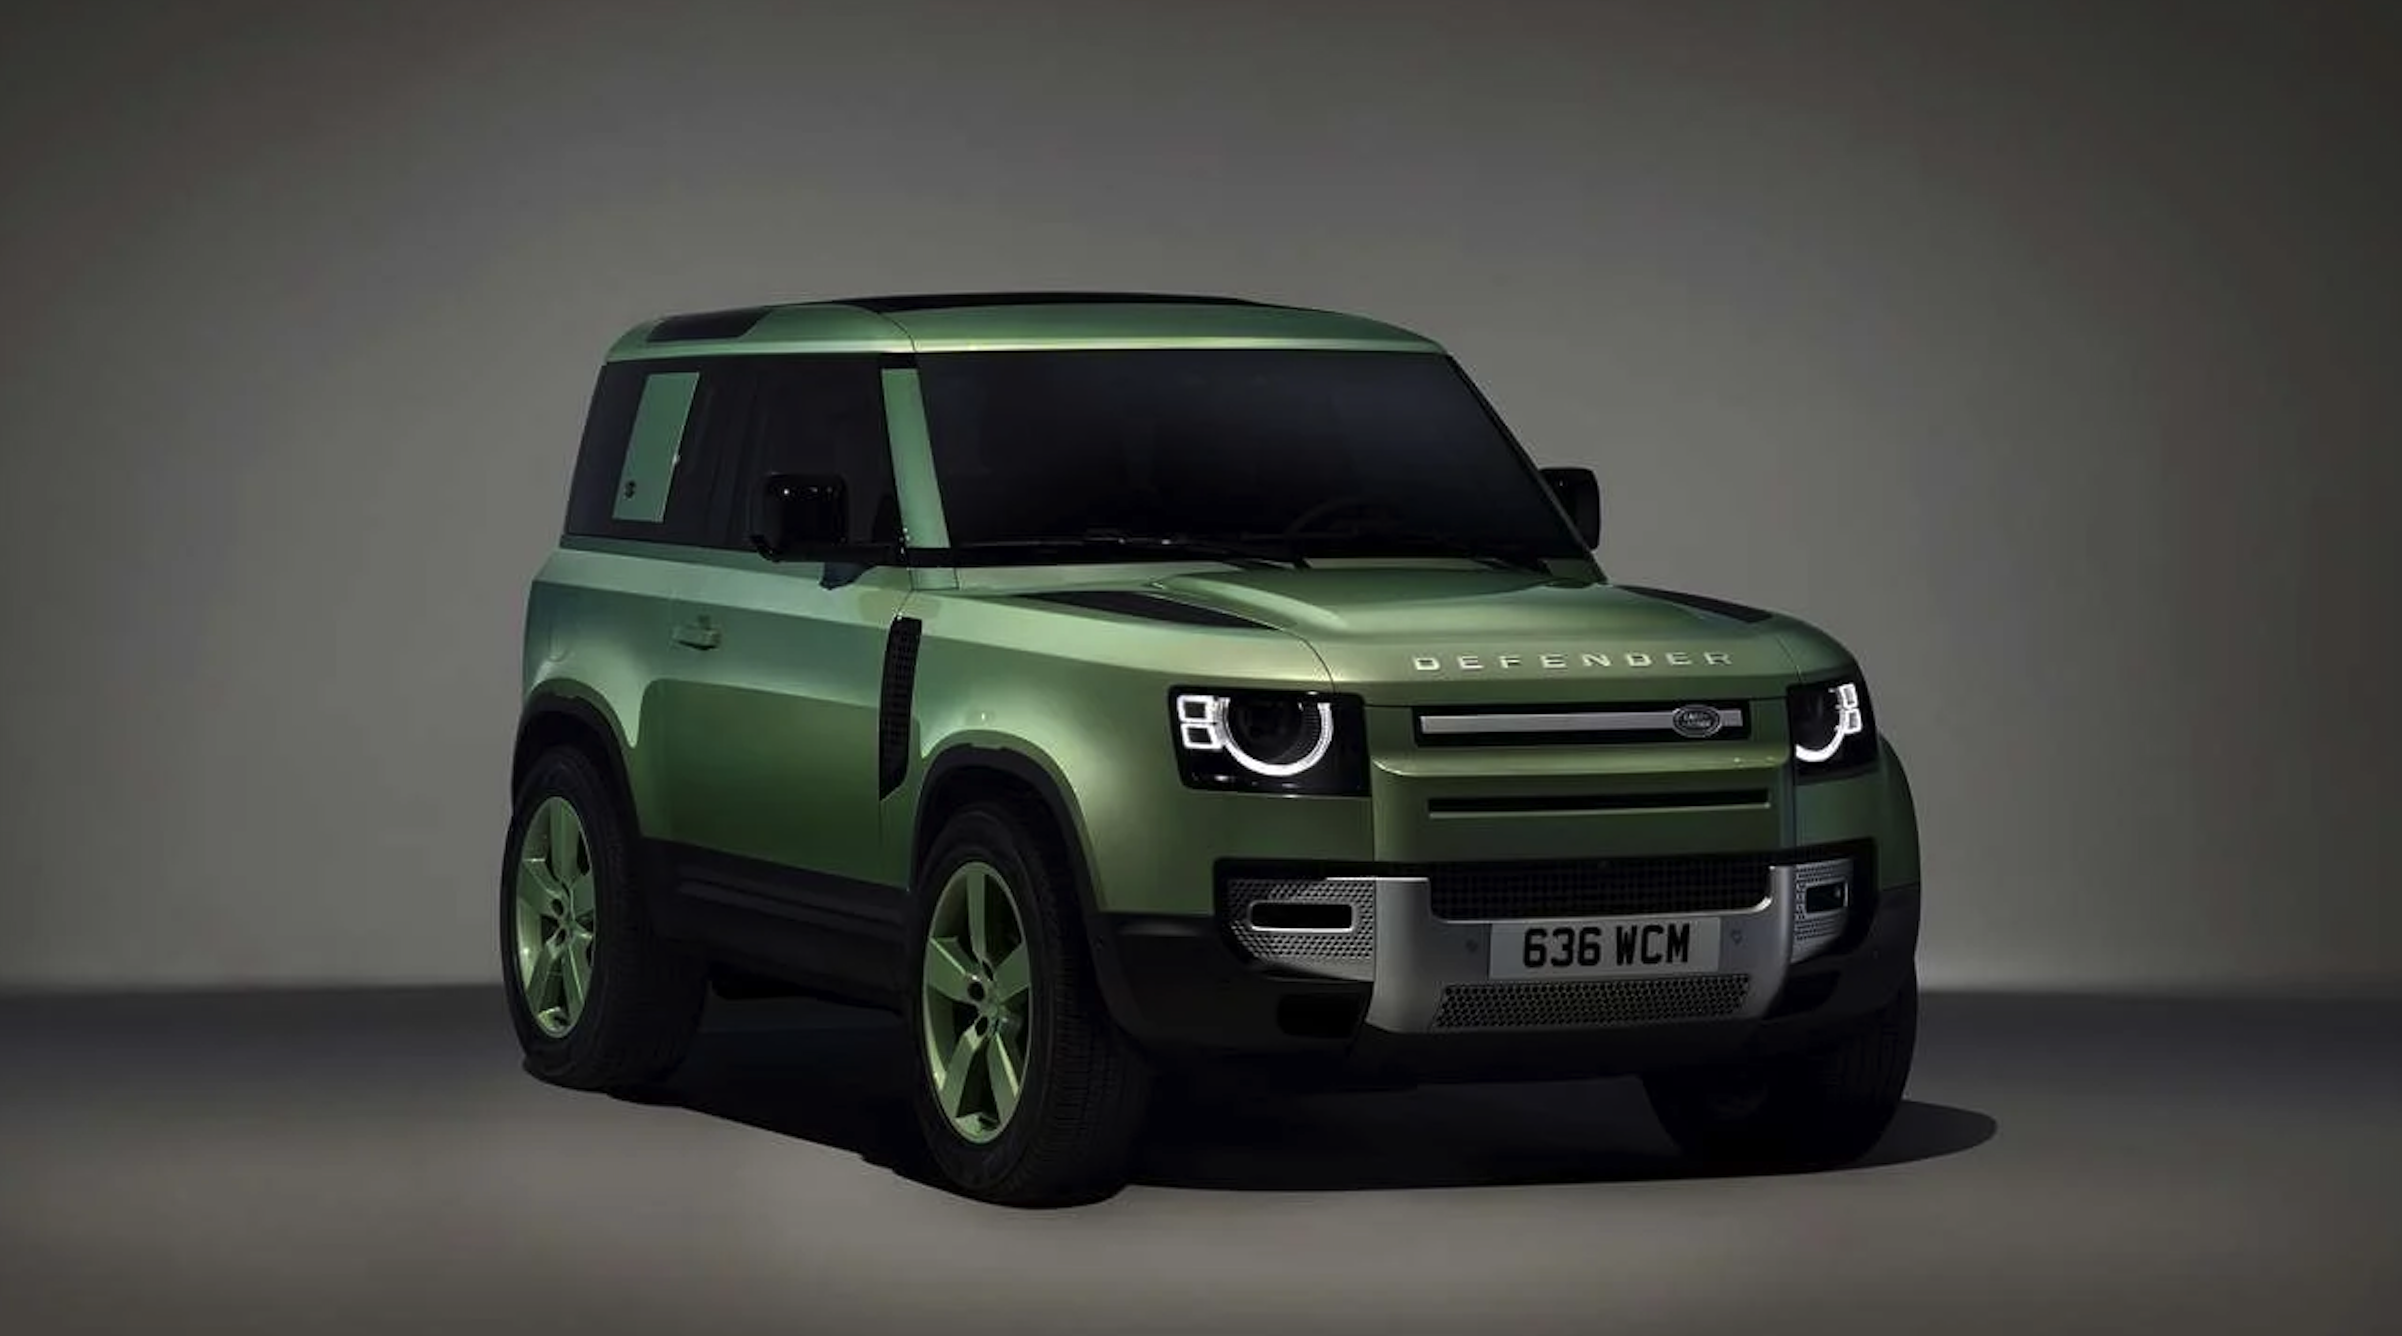 jaguars and land rovers to be known simply as jlr?